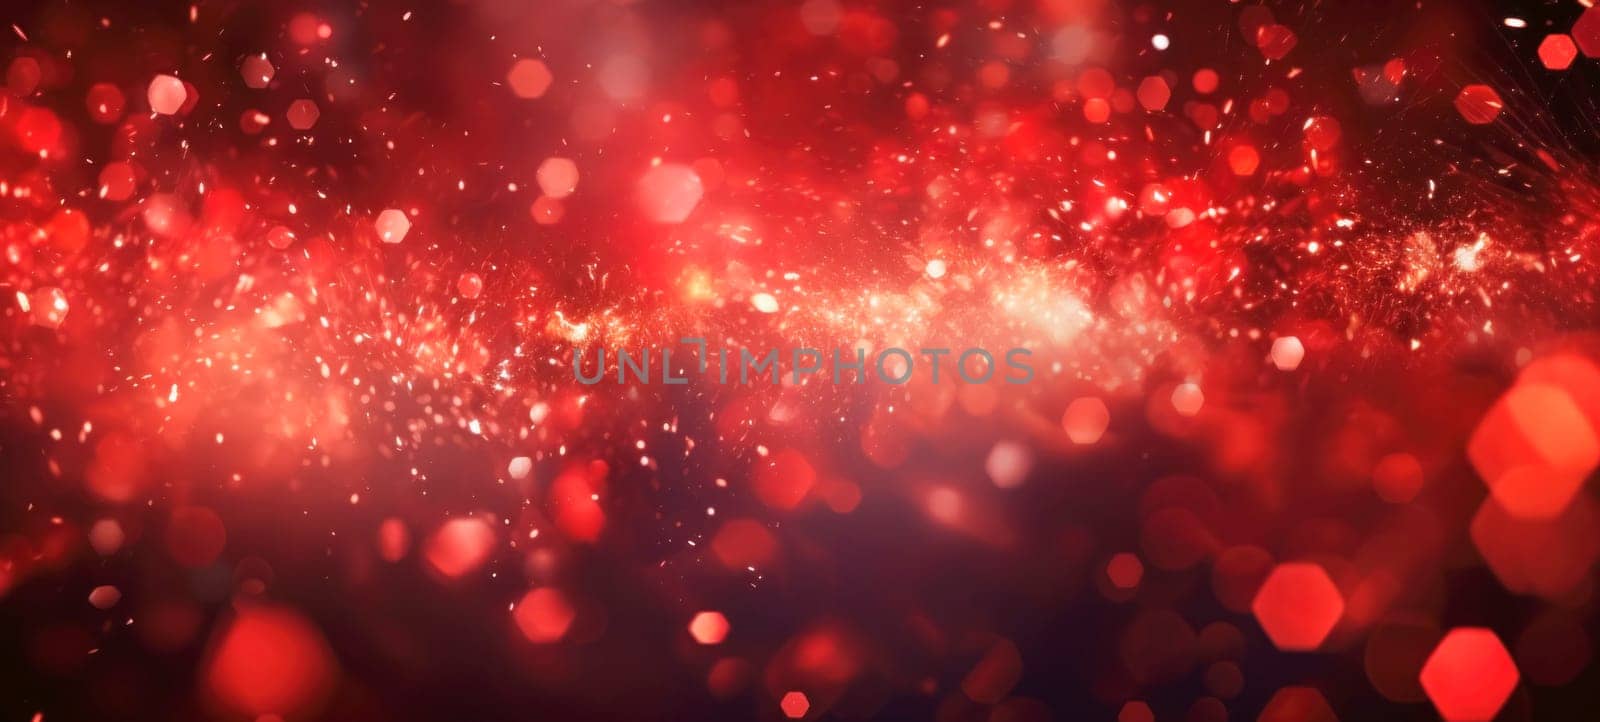 Abstract background with red fireworks, sparkles, shiny bokeh glitter lights by andreyz